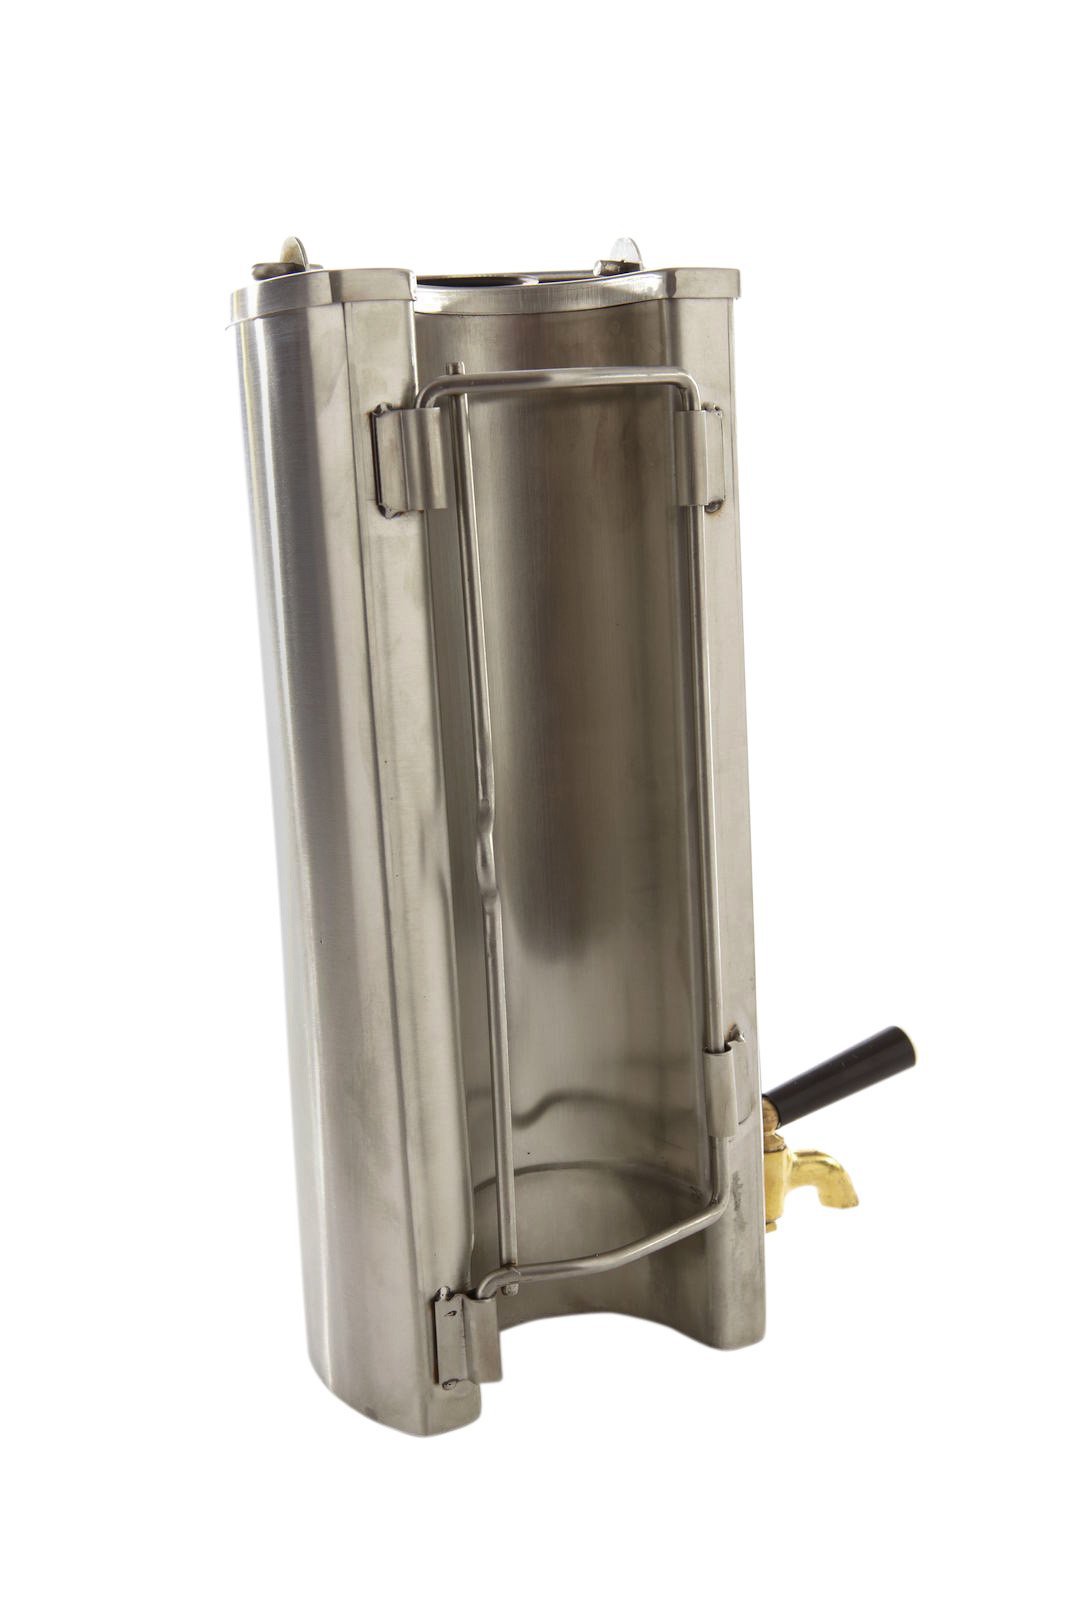 Outbacker stove water heater